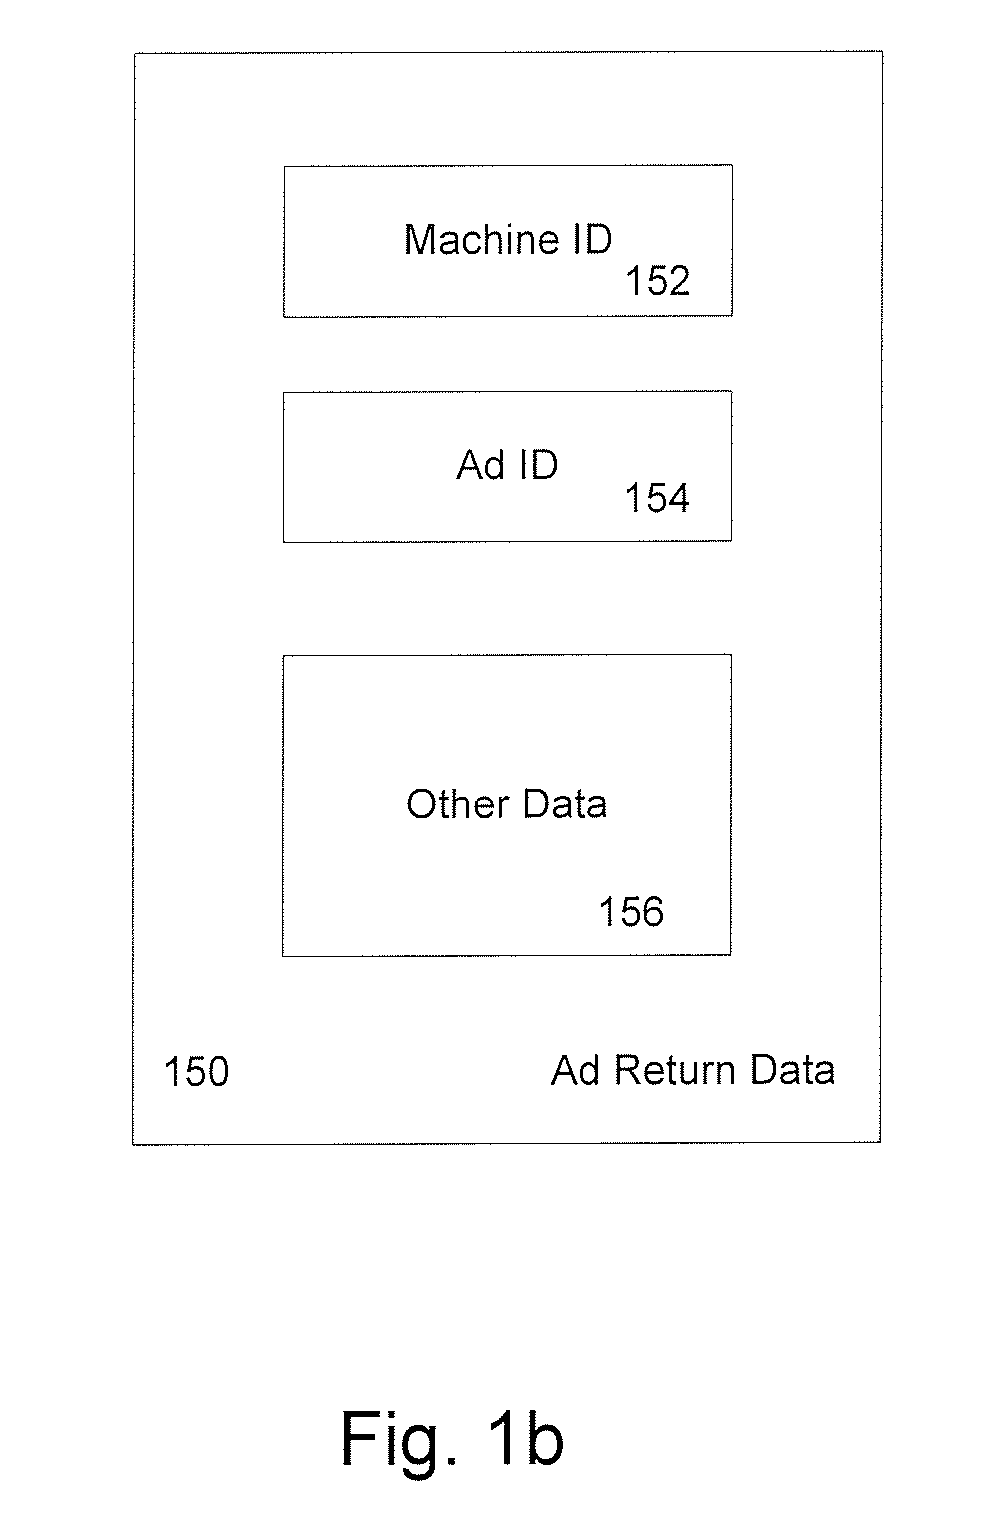 Method for Detecting and Preventing Fraudulent Internet Advertising Activity